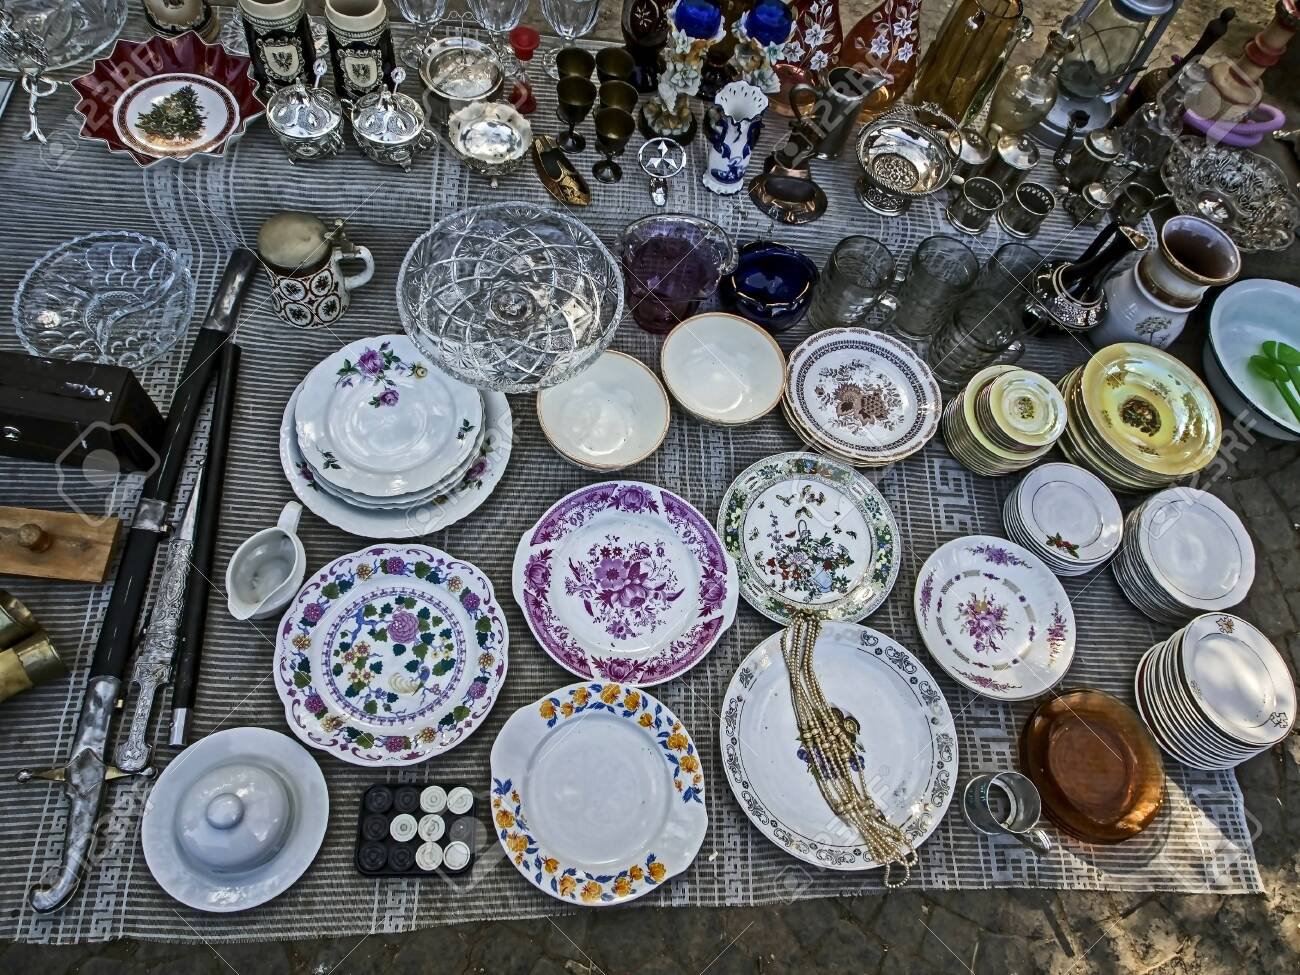 126756912-old-porcelain-plates-with-beautiful-pictures-at-the-flea-market-in-tbilisi.jpg